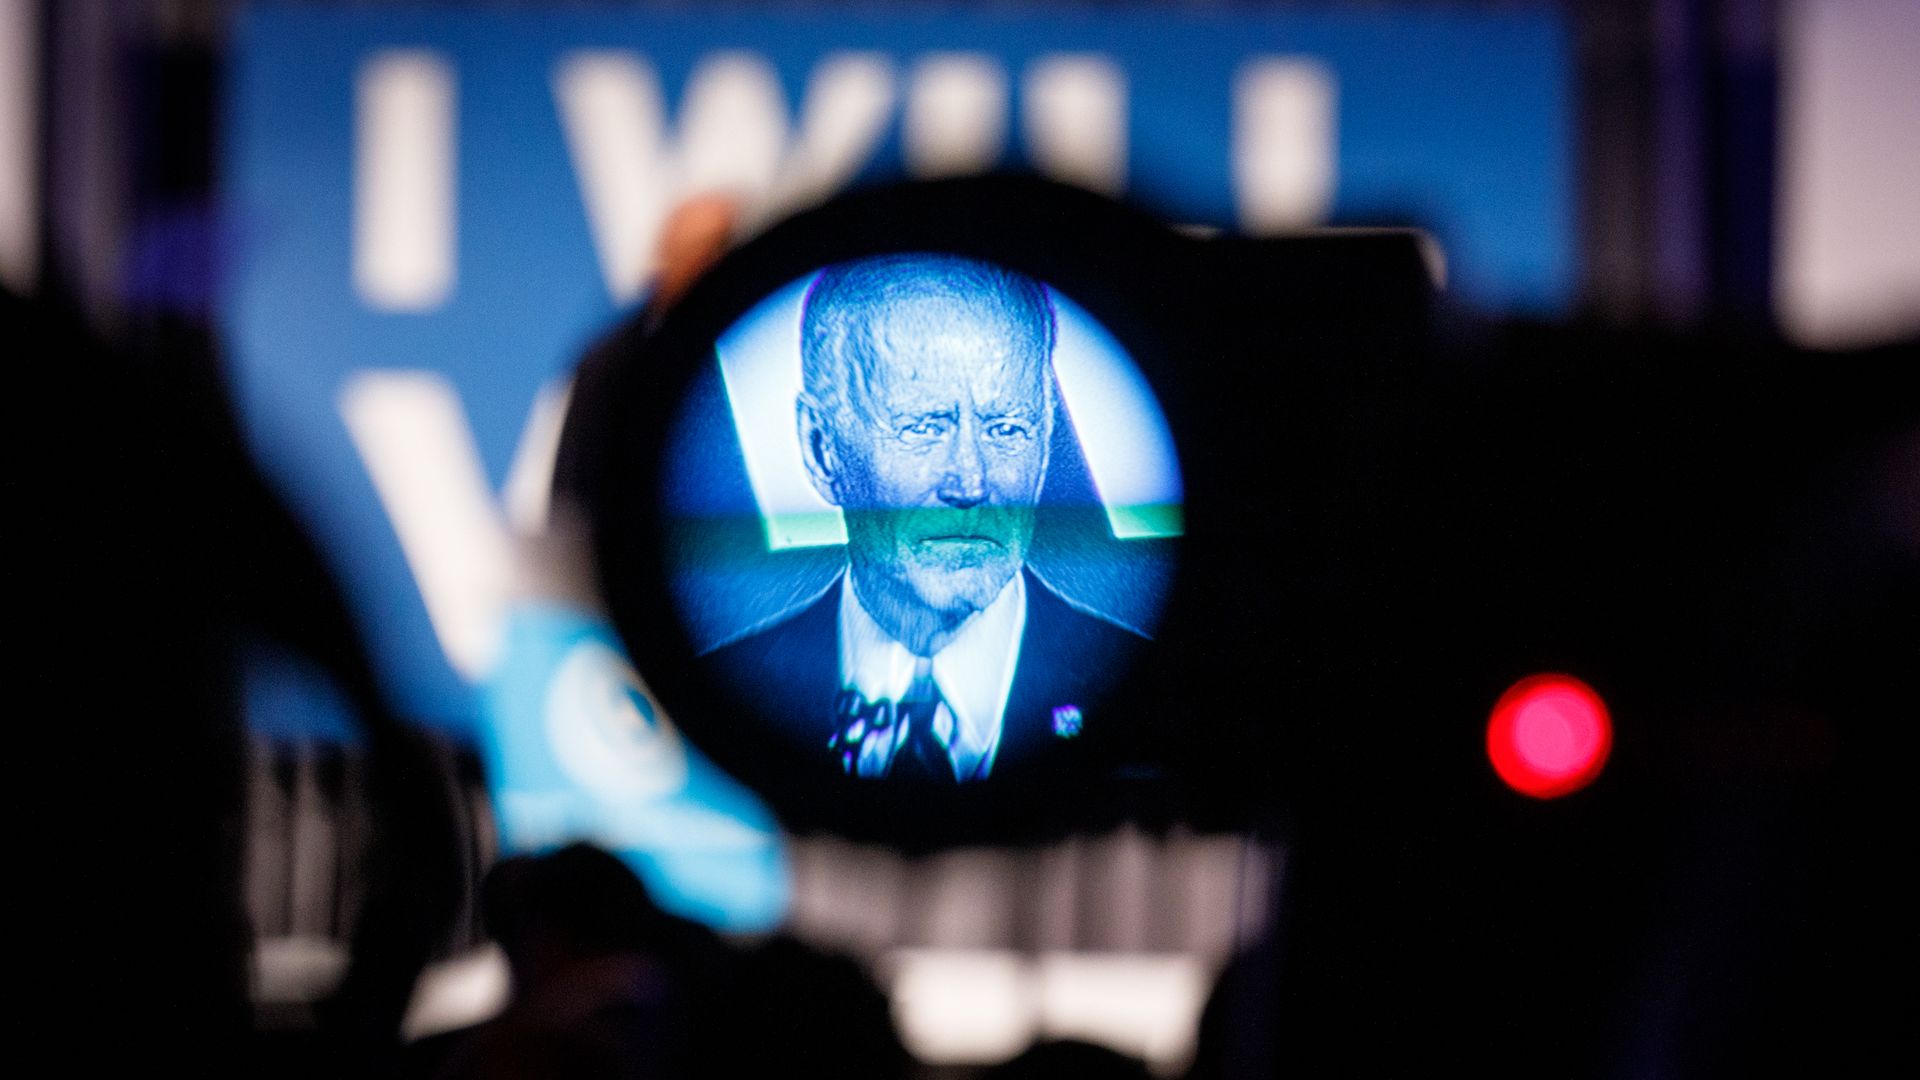 In this image, Biden is seen in a blue filter on a TV camera as he's being filmed while speaking on stage.